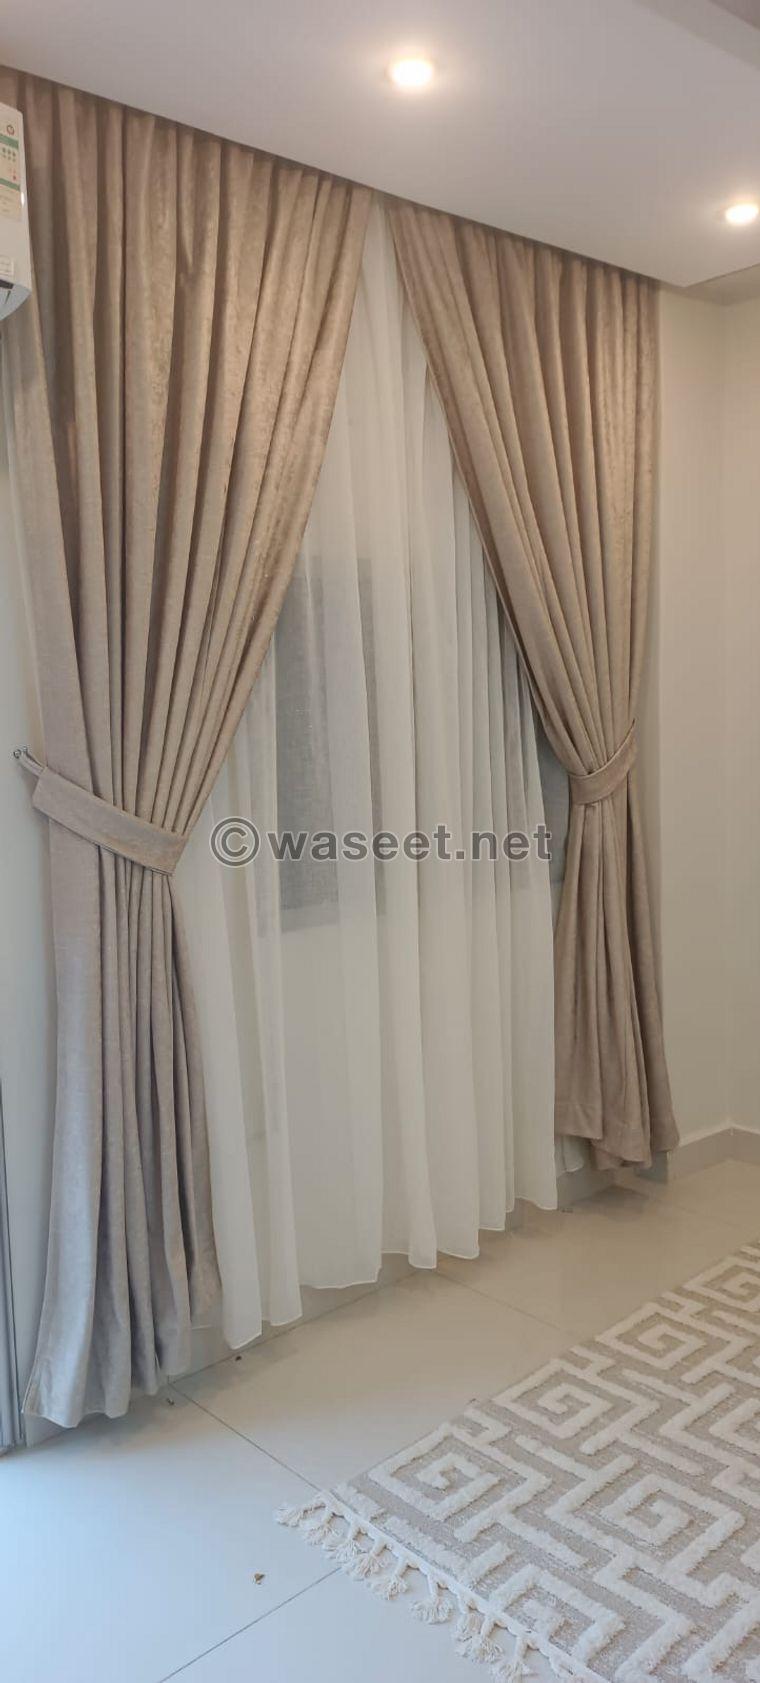 Galleria is the style of upholstery and curtain  2